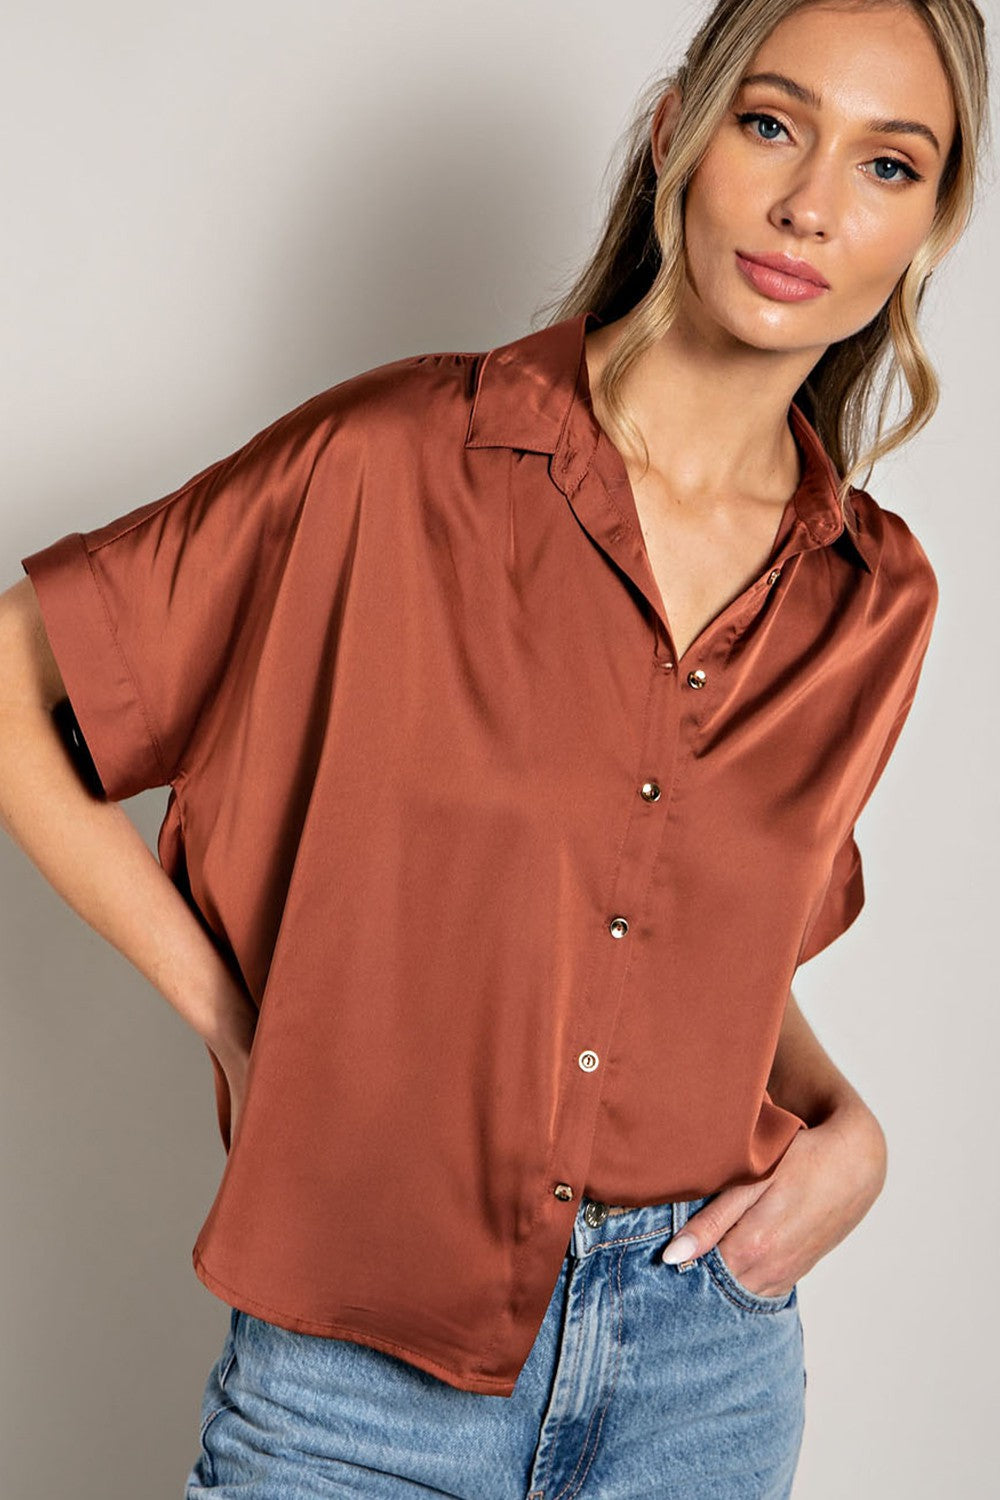 Satin Button up Top in Coco